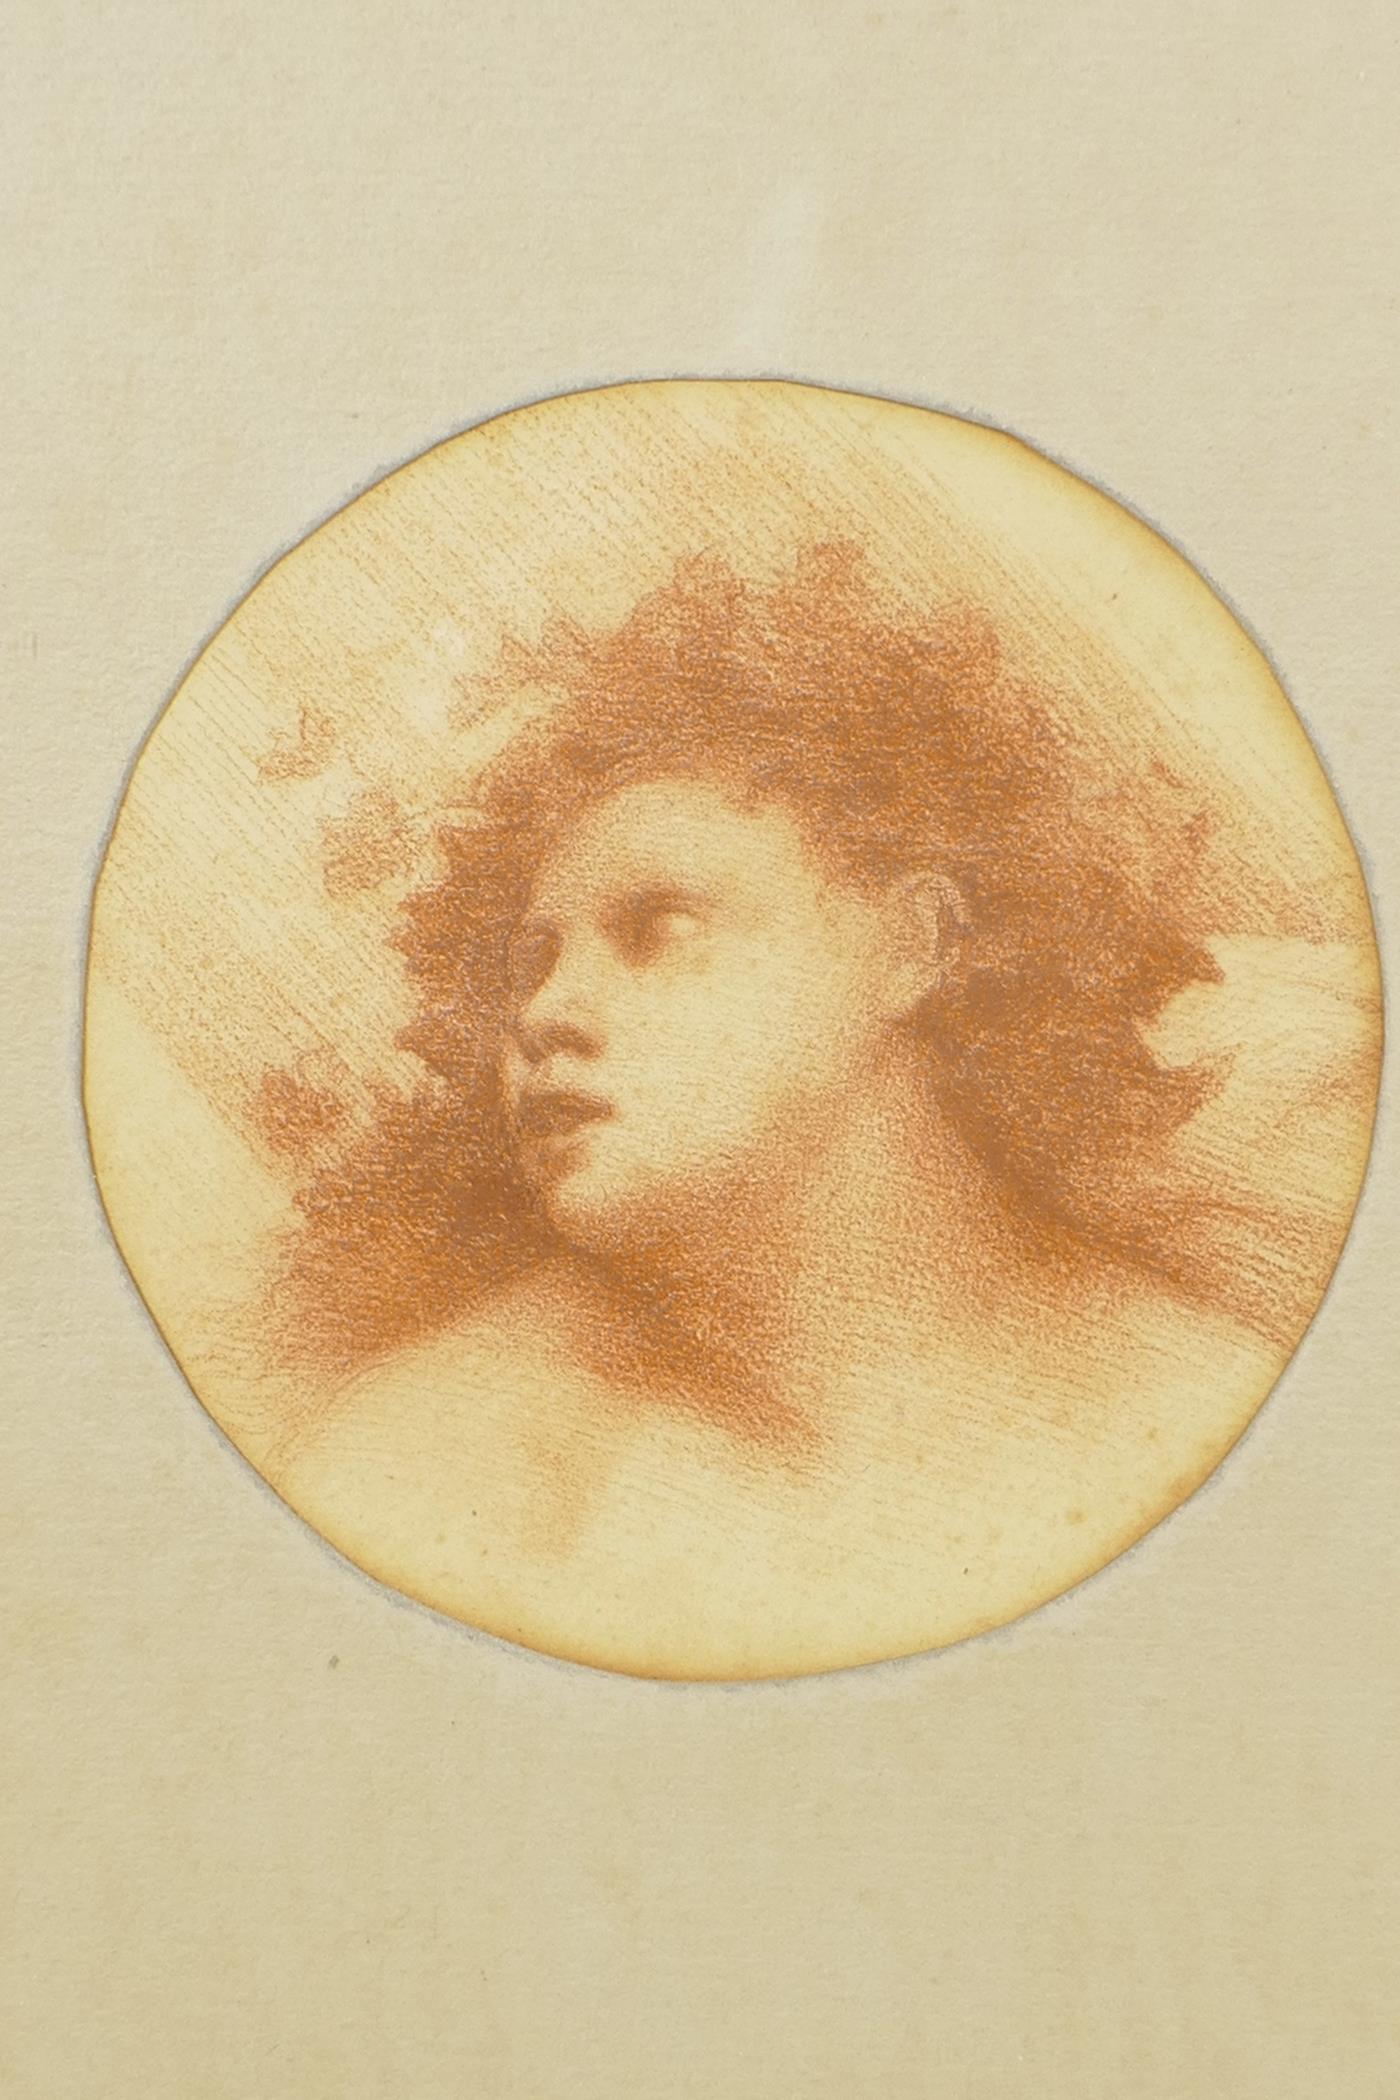 Head study of a young man, C19th Pre-Raphaelite style sanguin drawing - Image 2 of 3